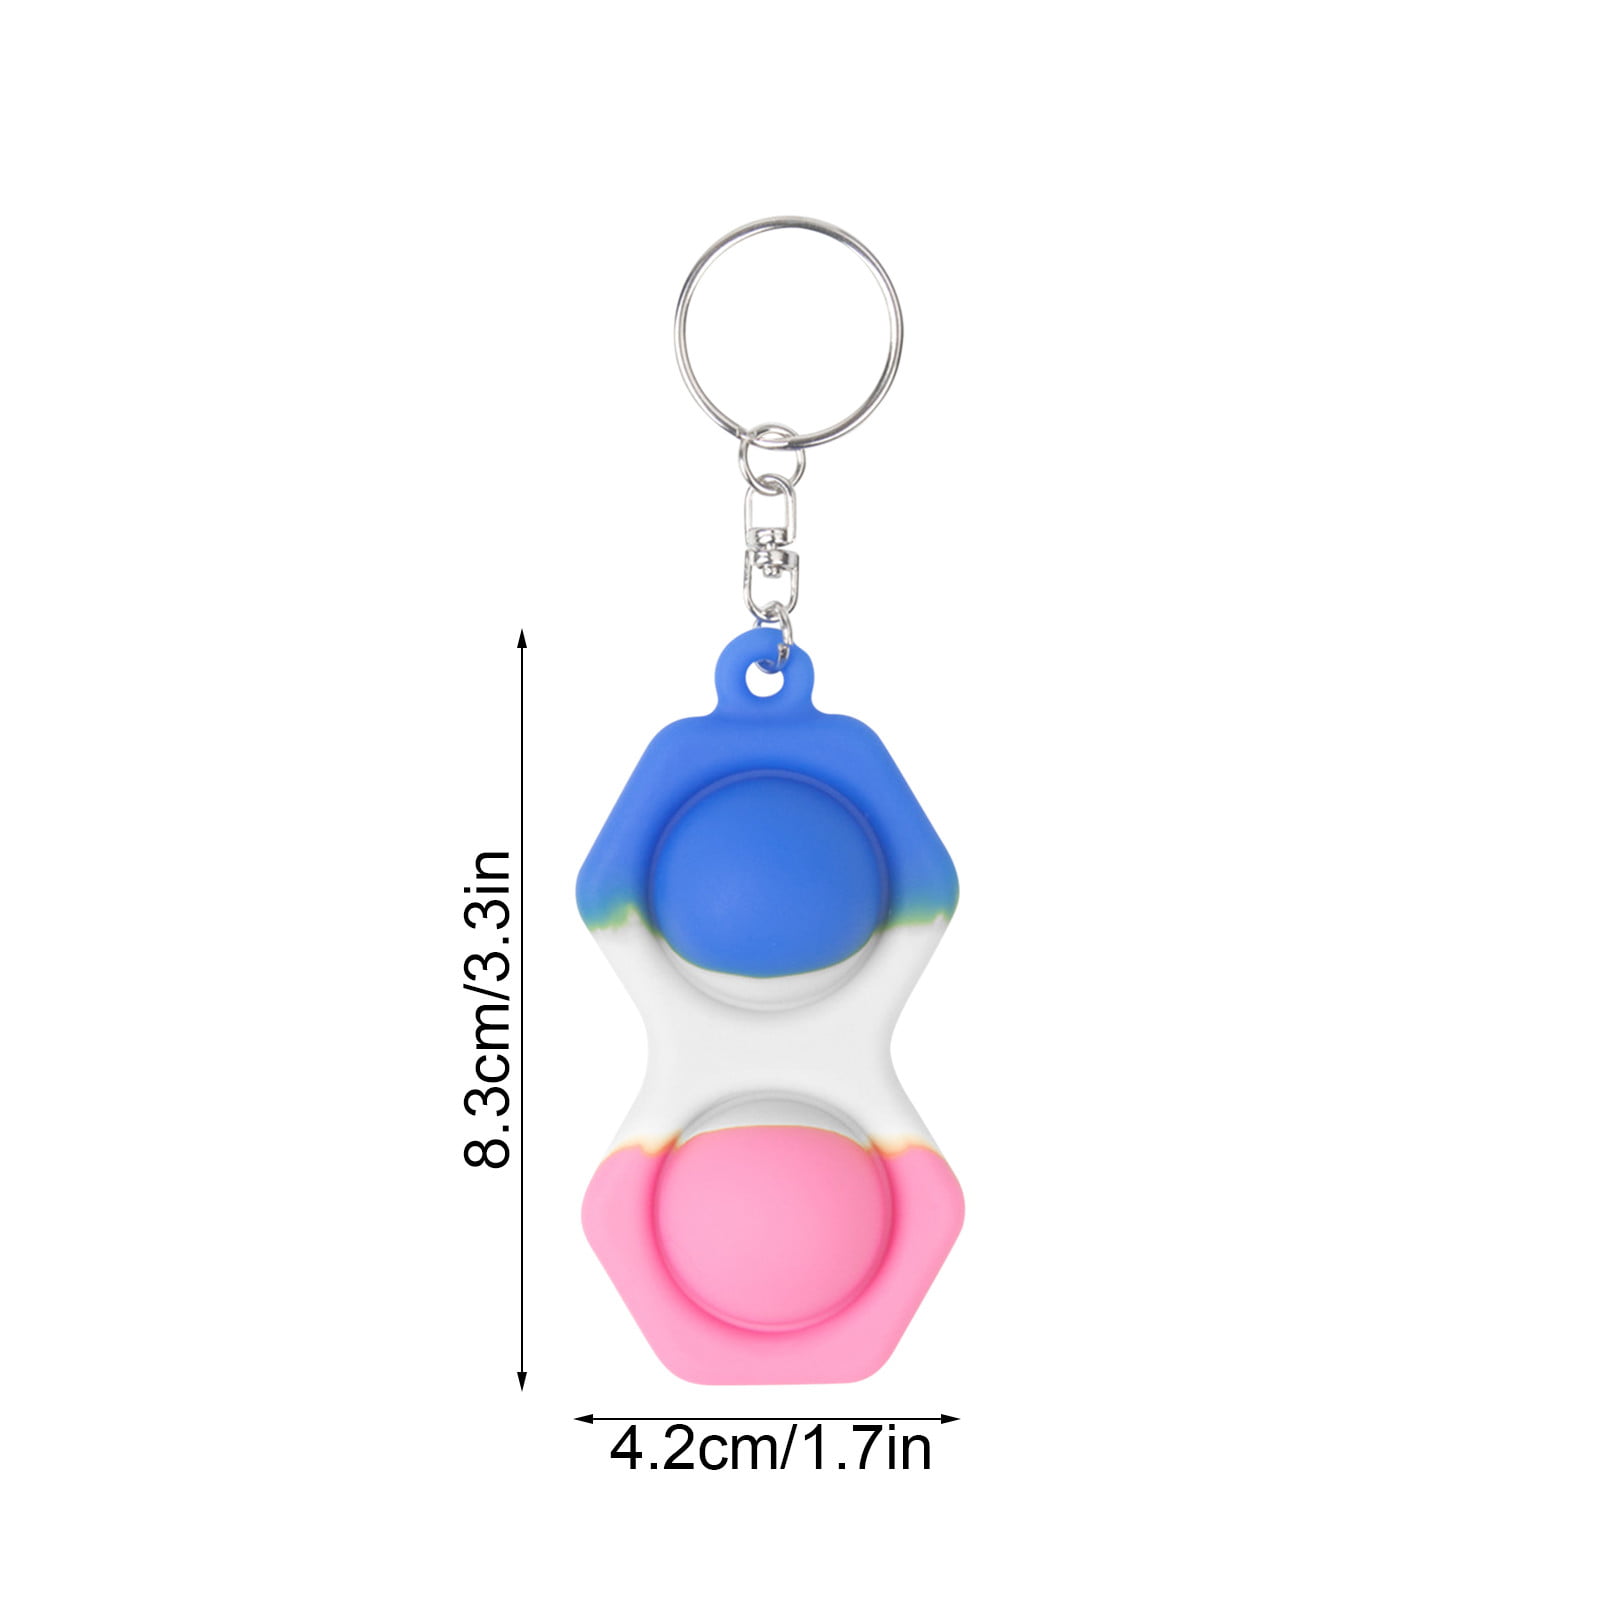 Details about   Baby Simple Dimple Fidget Toy Stress Relief ADHD Autism Educational Finger Toys 